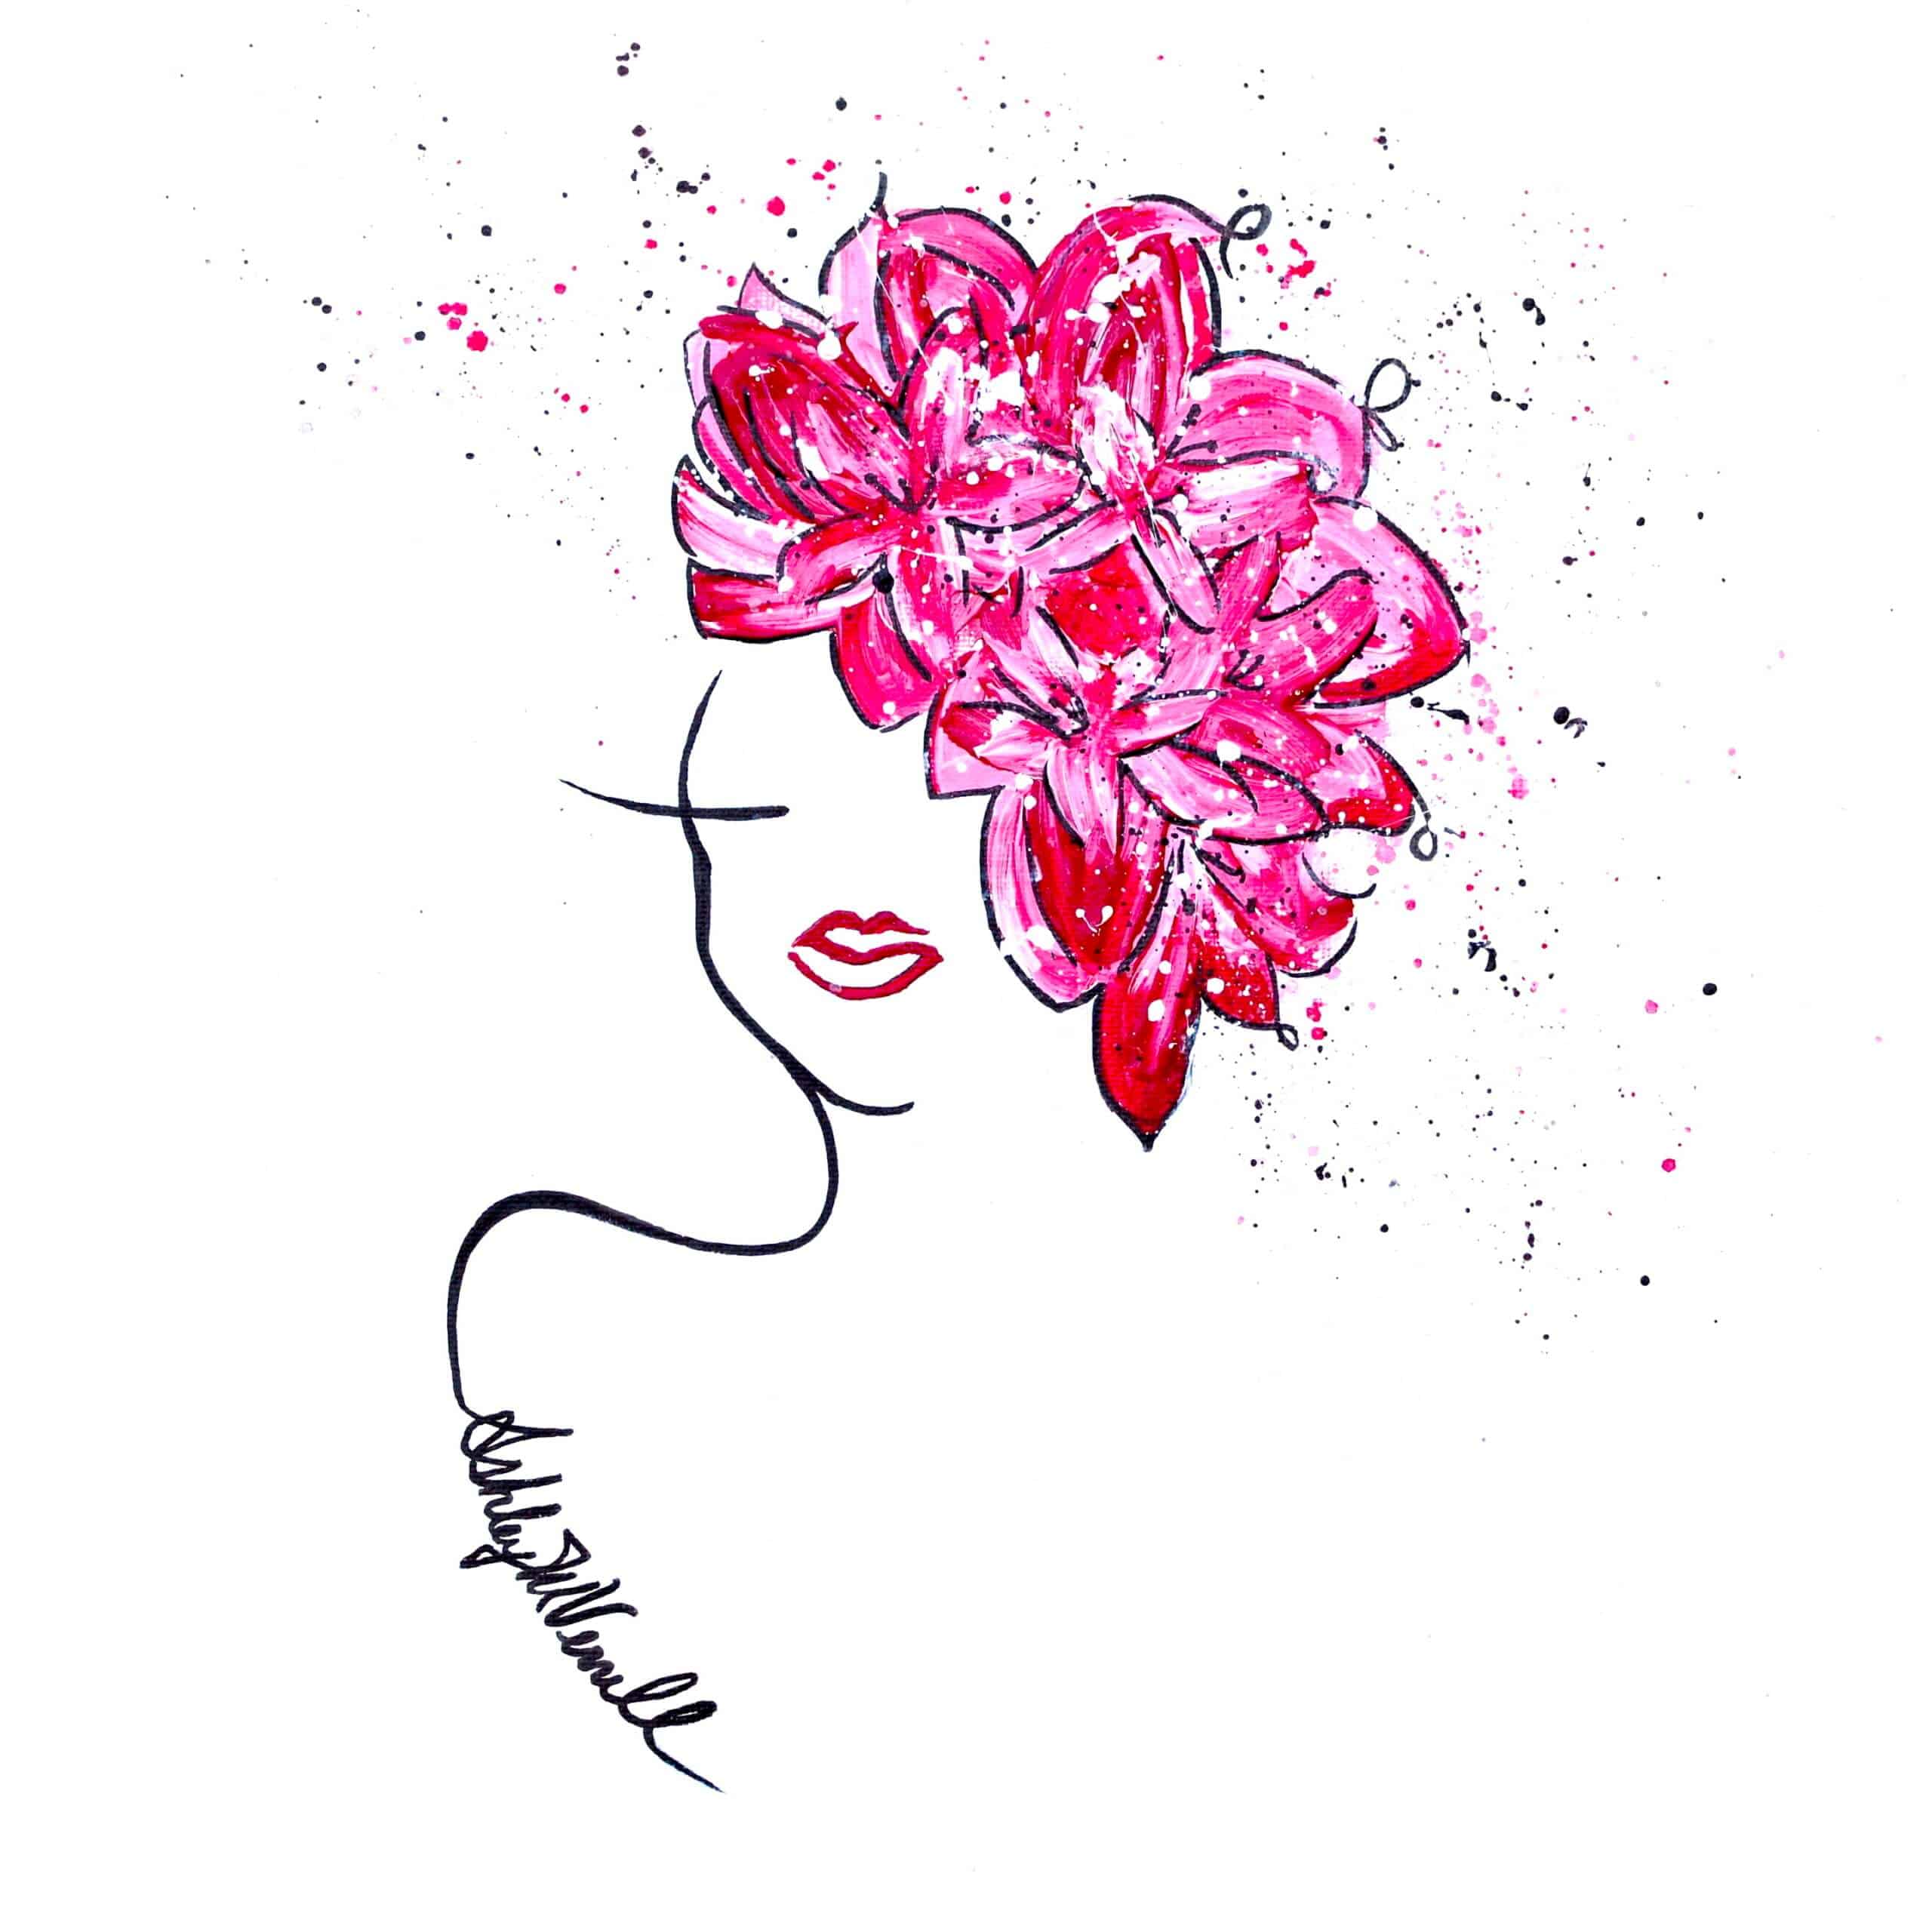 Minimalist Line Art Female Figure With Abstract Red Flowers in Her Hair